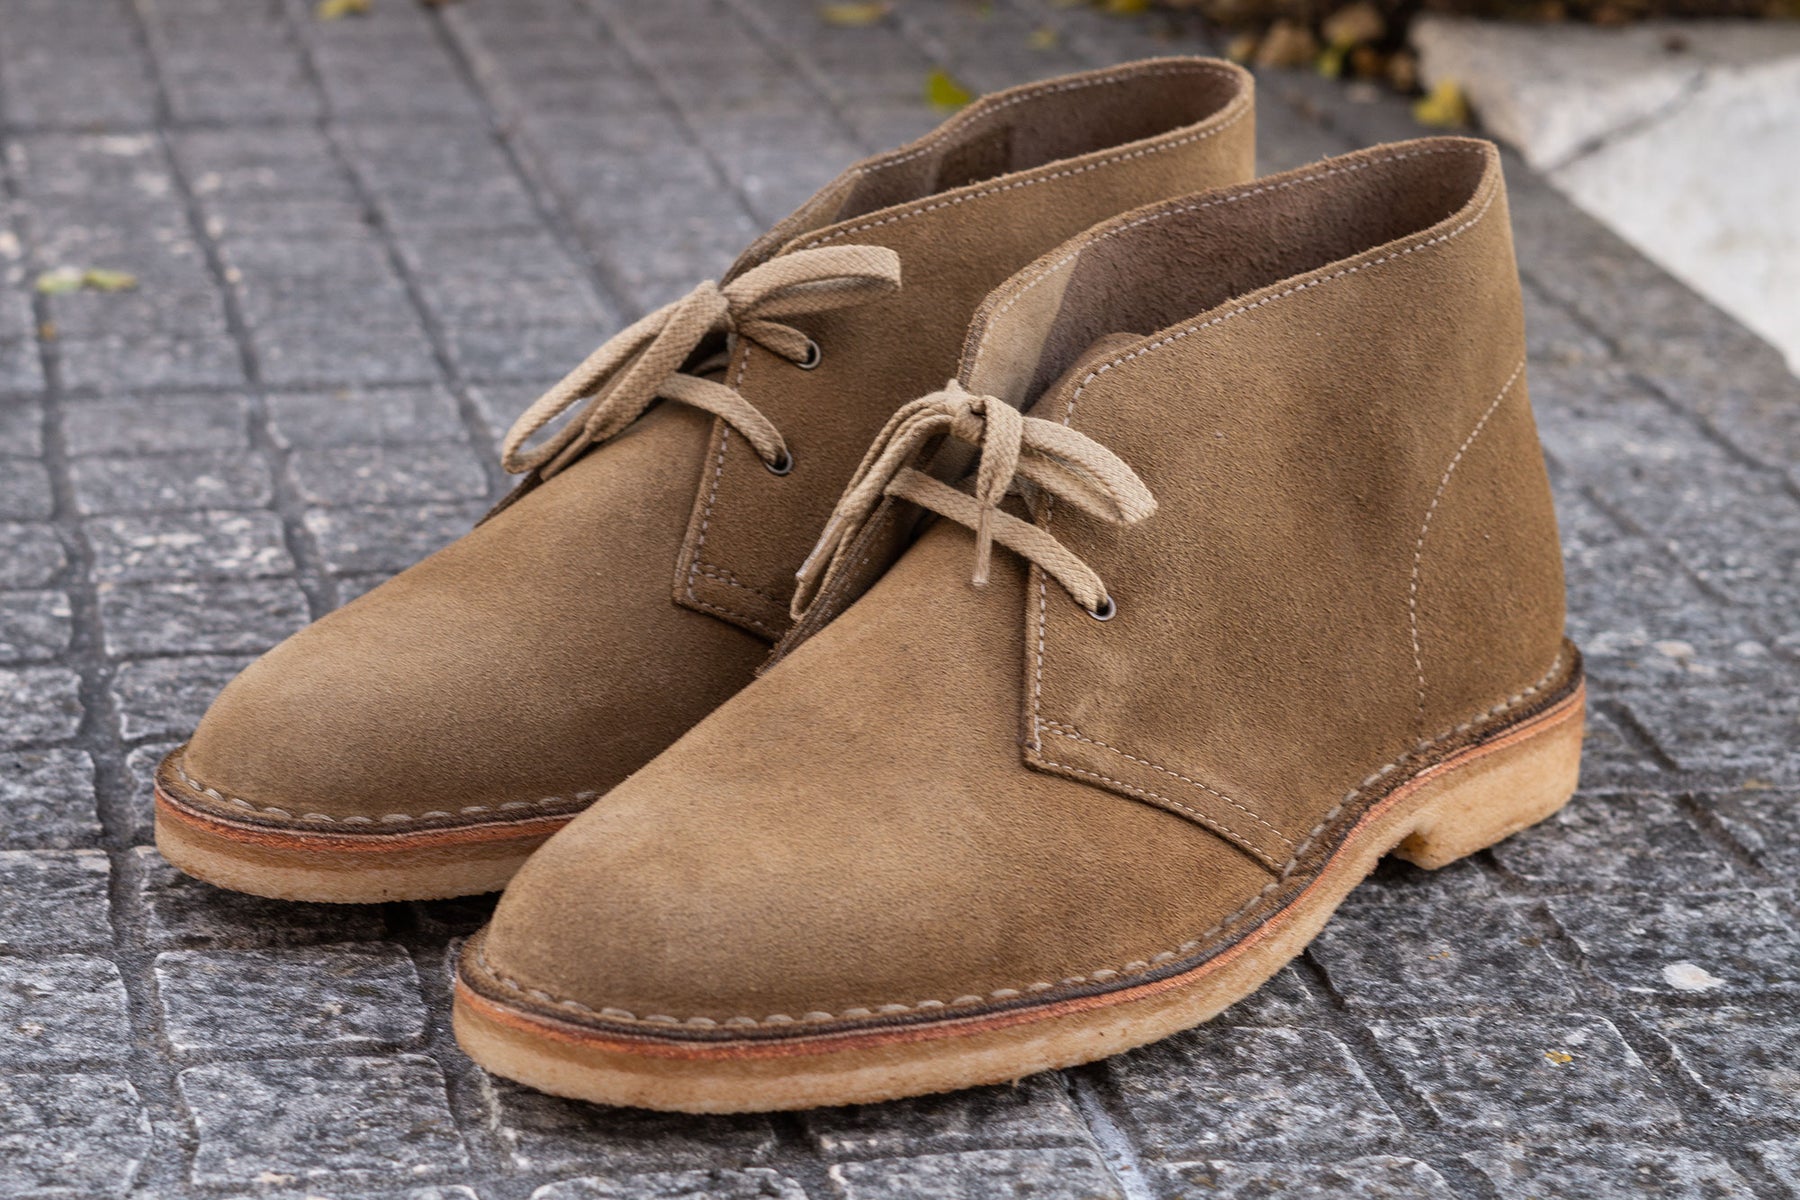 Type 01 Desert Boots Acorn Sand Limited Edition Deadstock